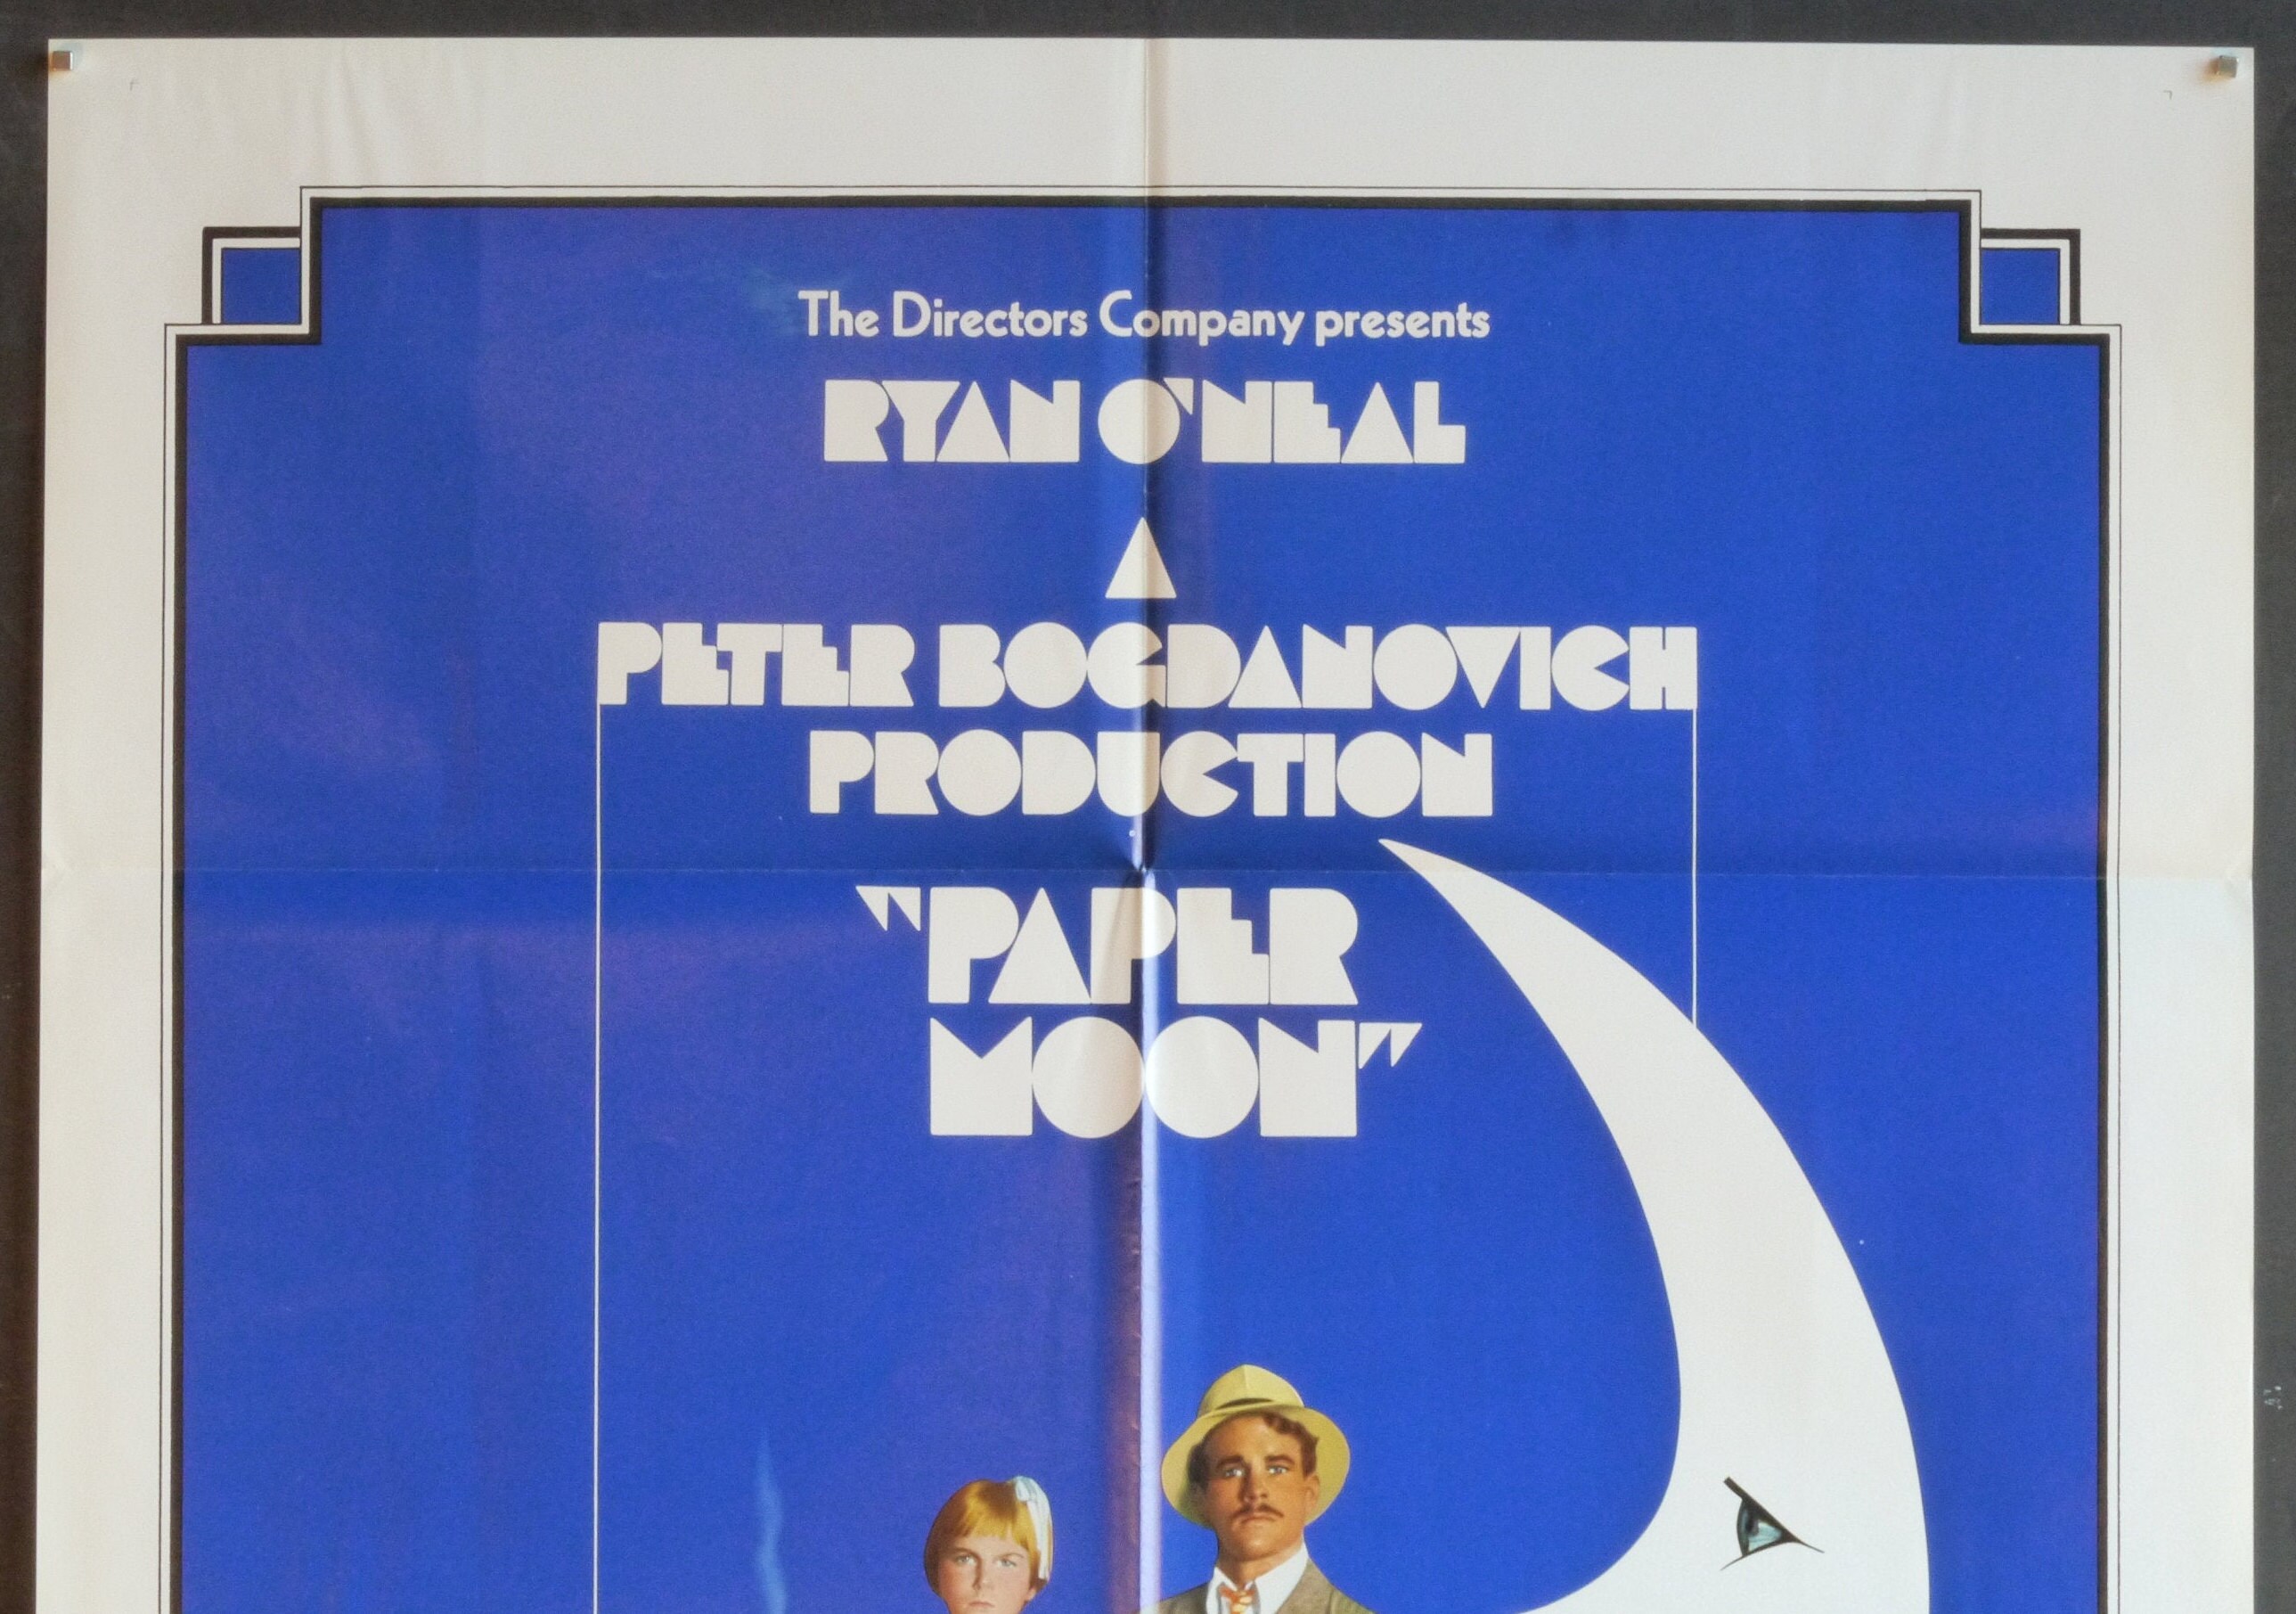 Paper Moon (1973) Movie Poster - The Curious Desk